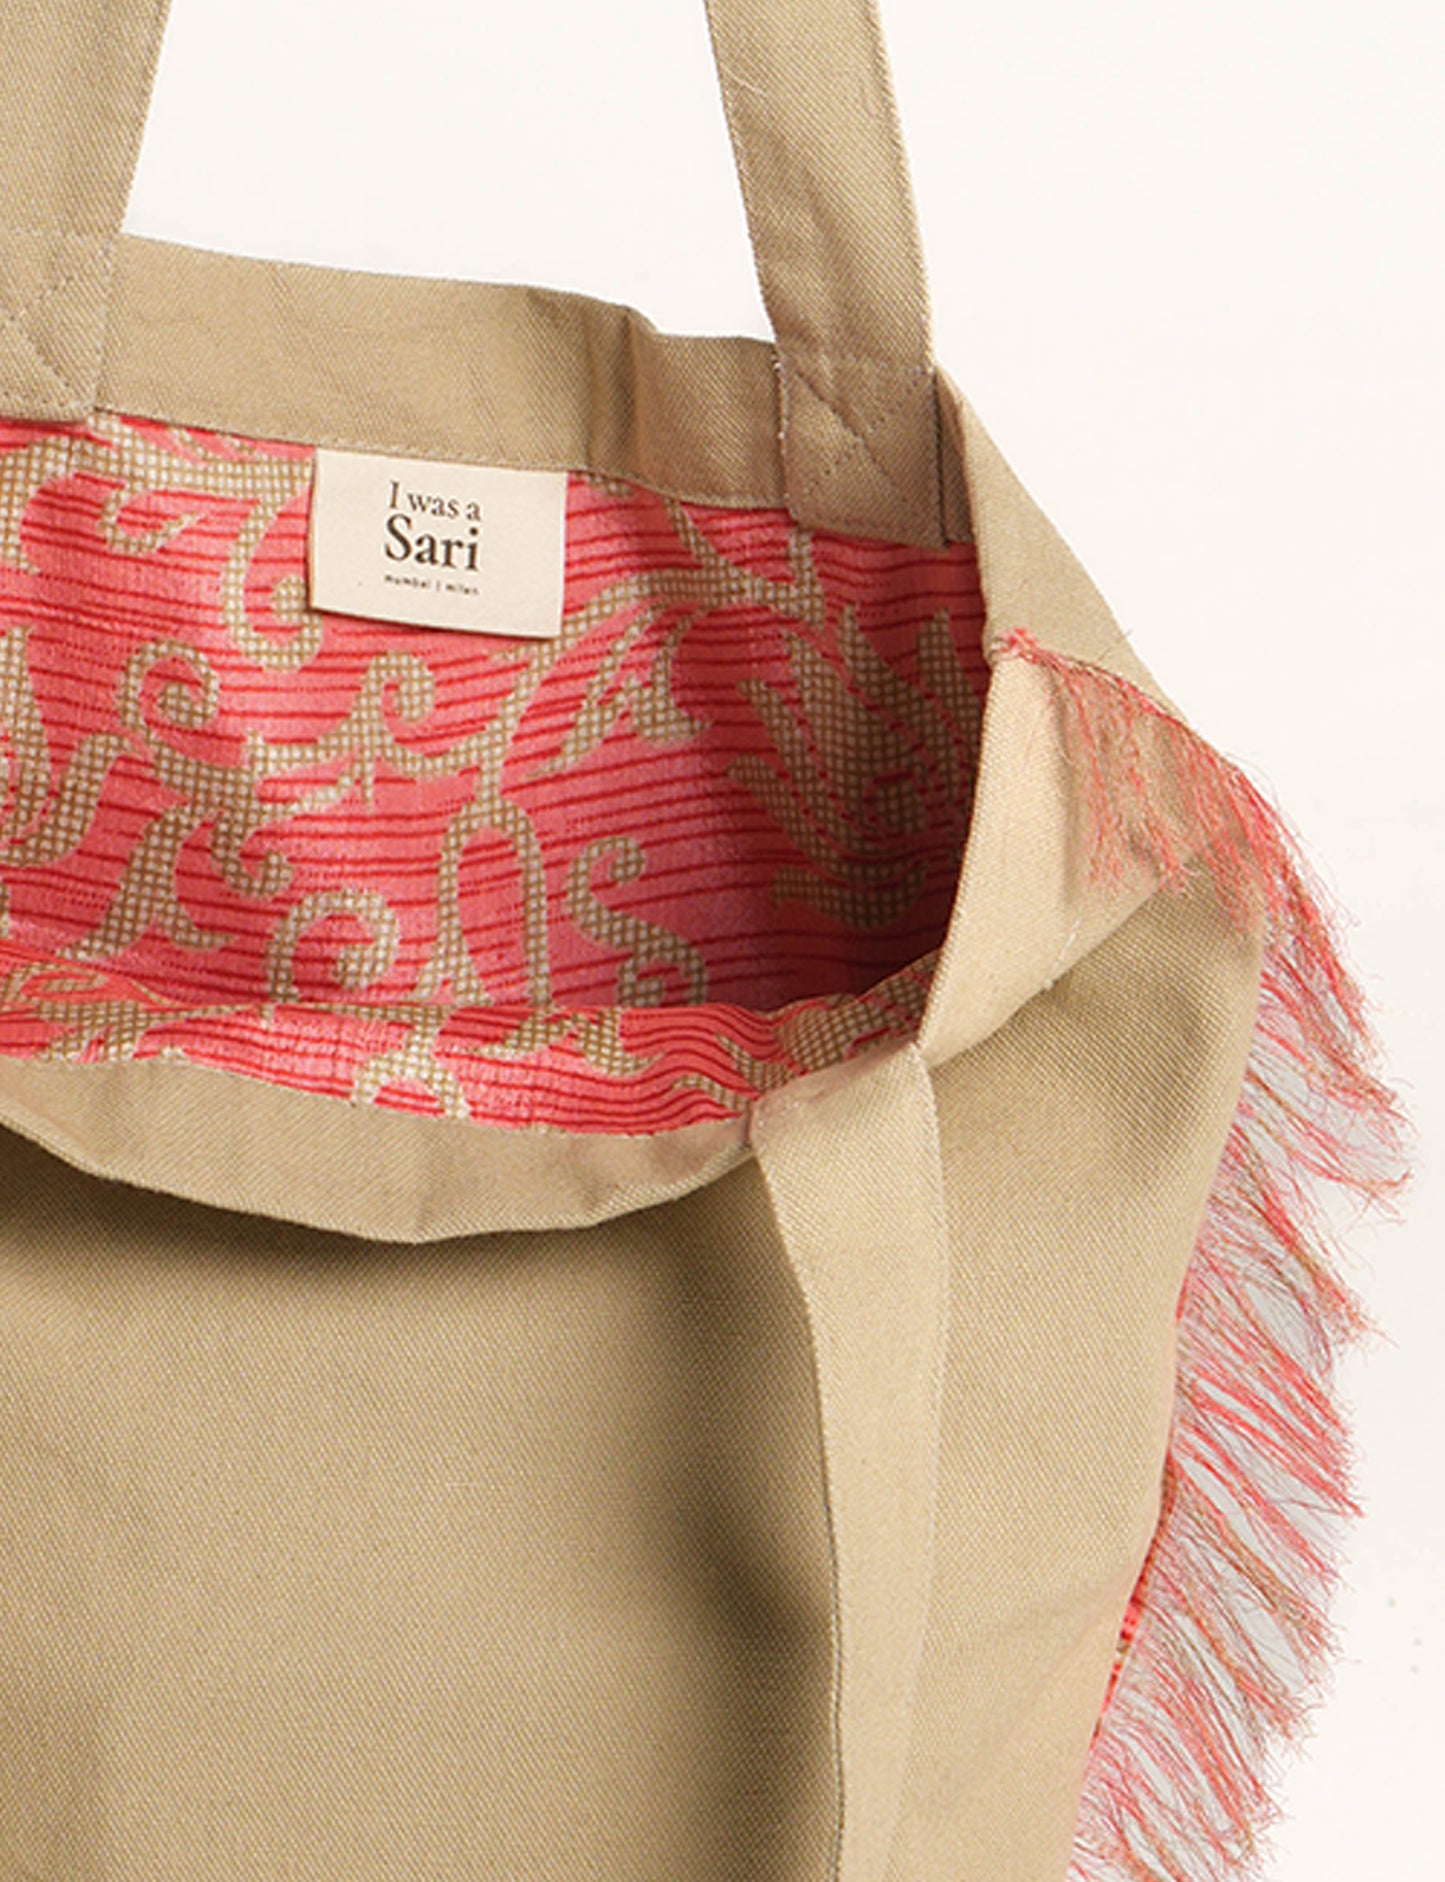 Stylish FRINGE SHOPPER BAG crafted from 100% cotton canvas with sari fringe edging. A spacious and functional accessory, perfect for sustainable shopping with form and fashion in mind.